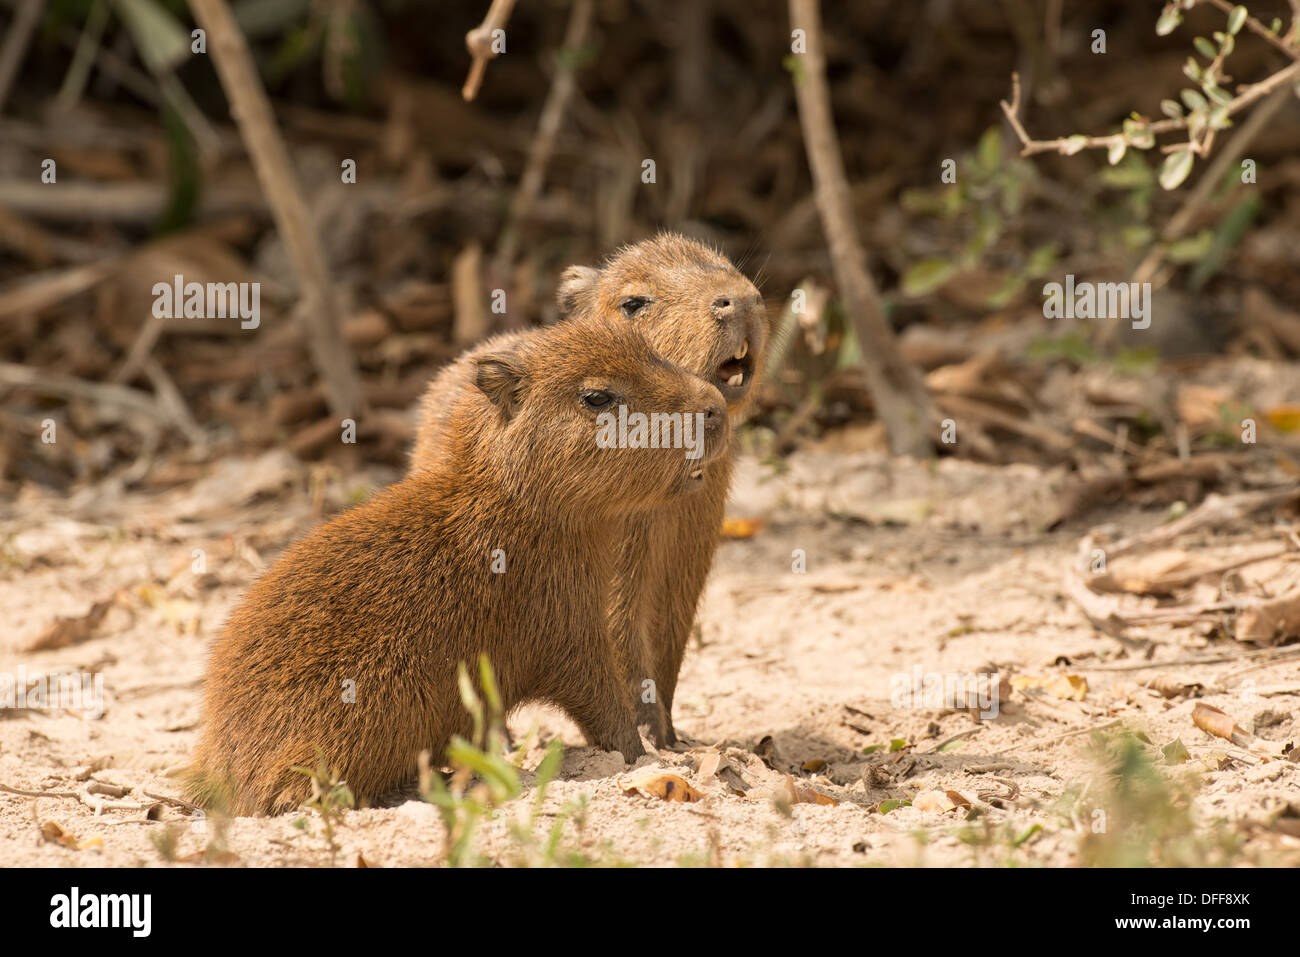 Stock photo of two baby capybaras sitting together, Pantanal, Brazil. Stock Photo